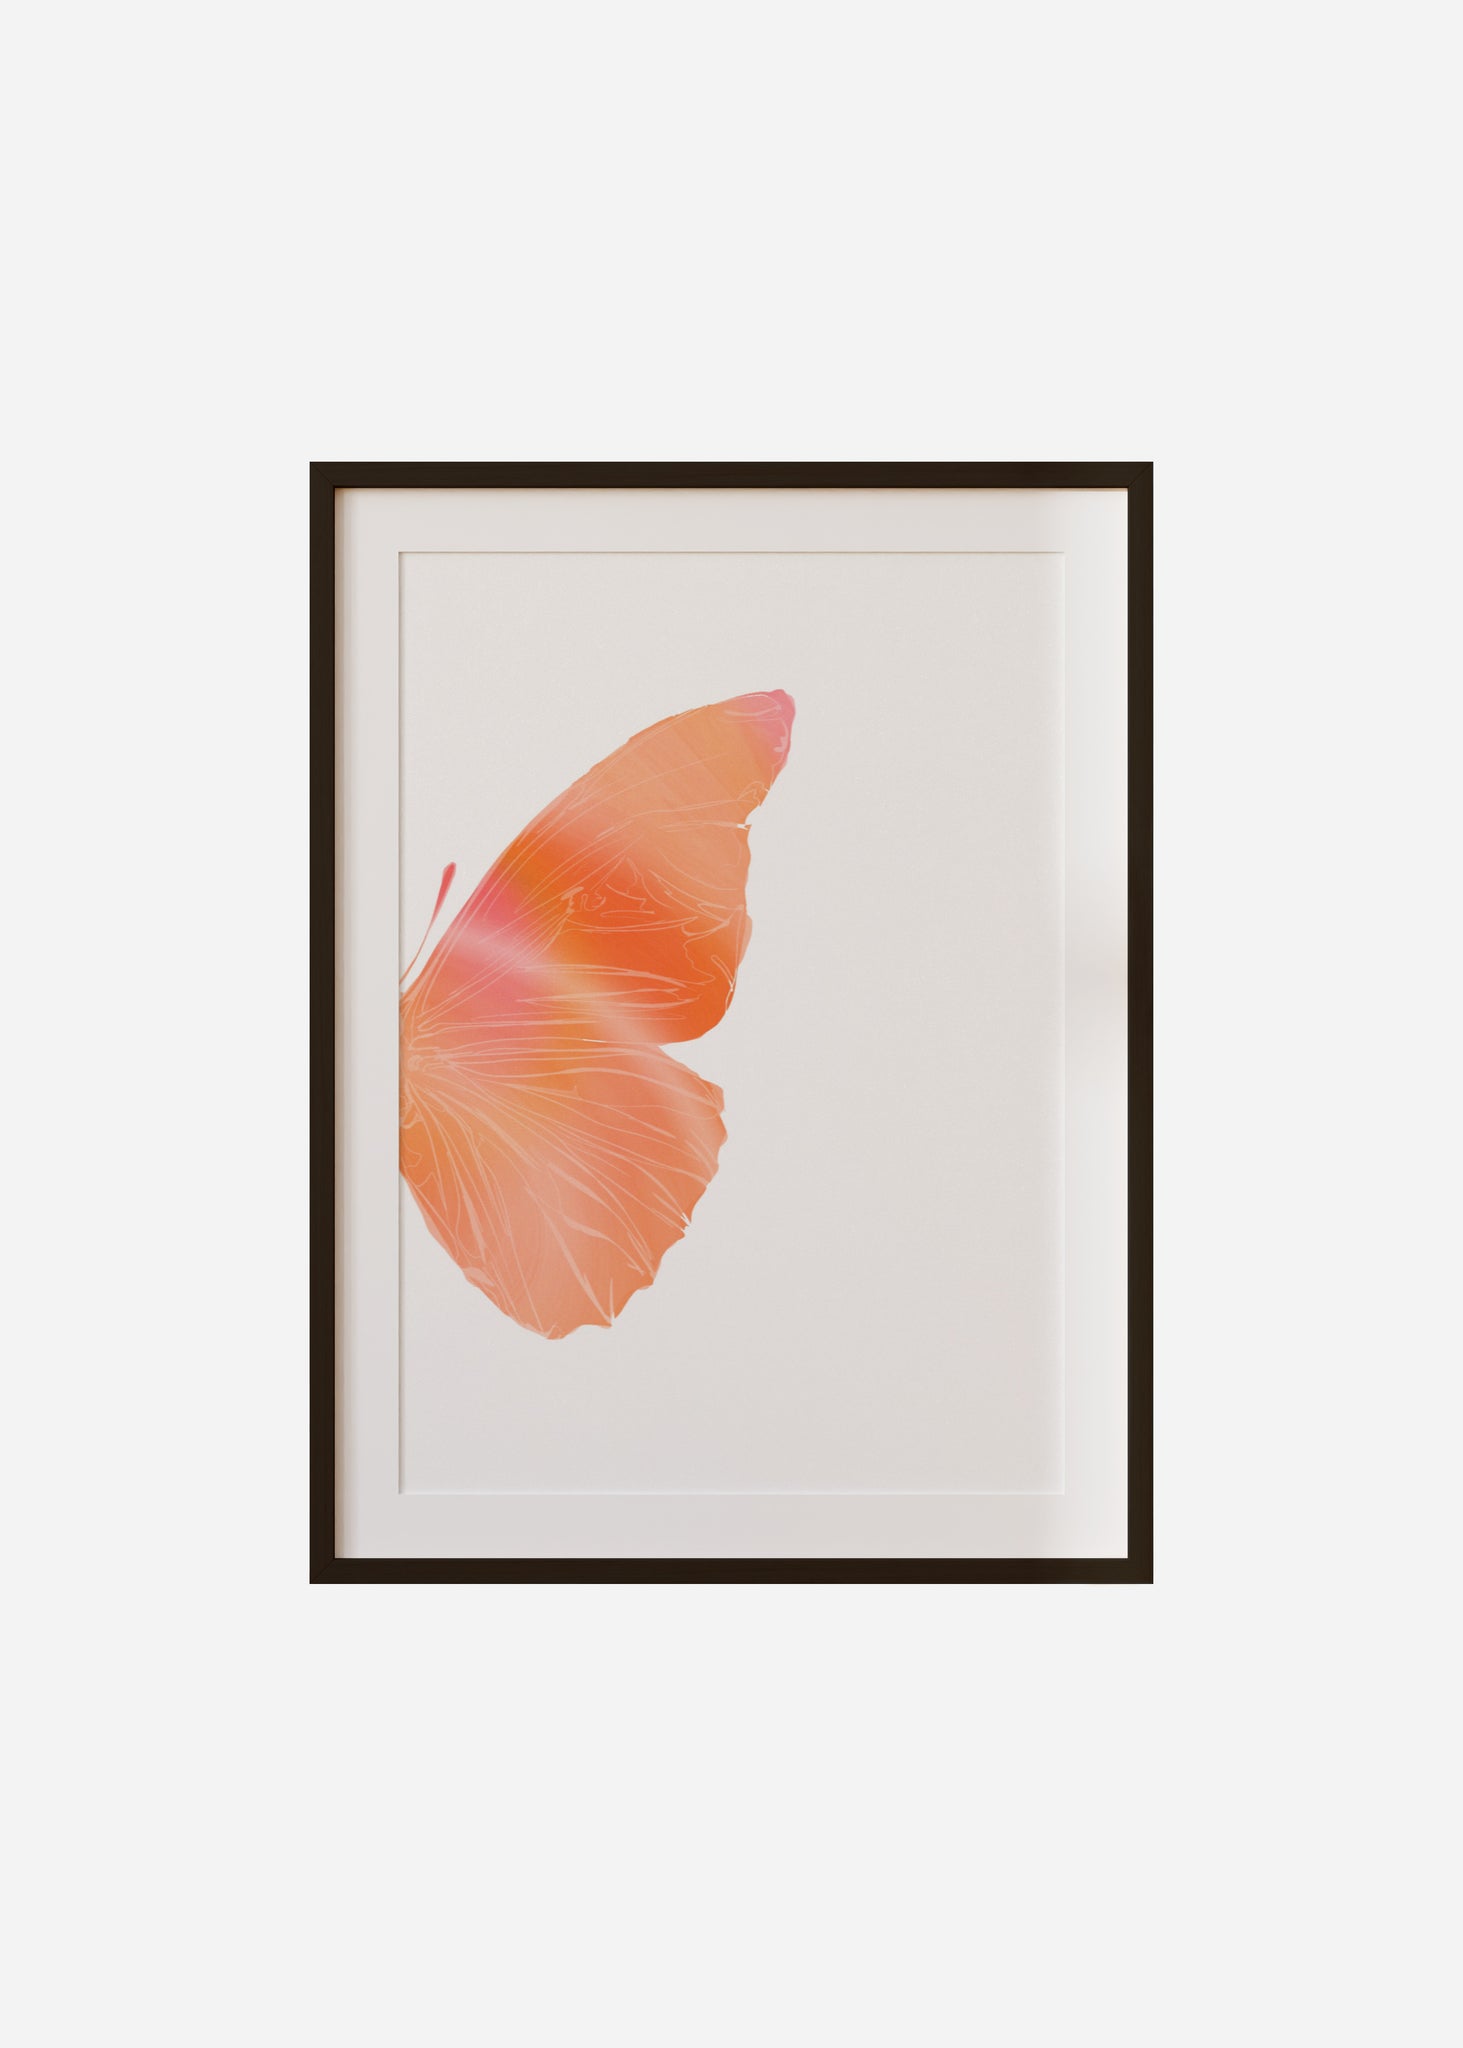 Butterfly Wings / Sunset Reflect 2/2 Framed & Mounted Print